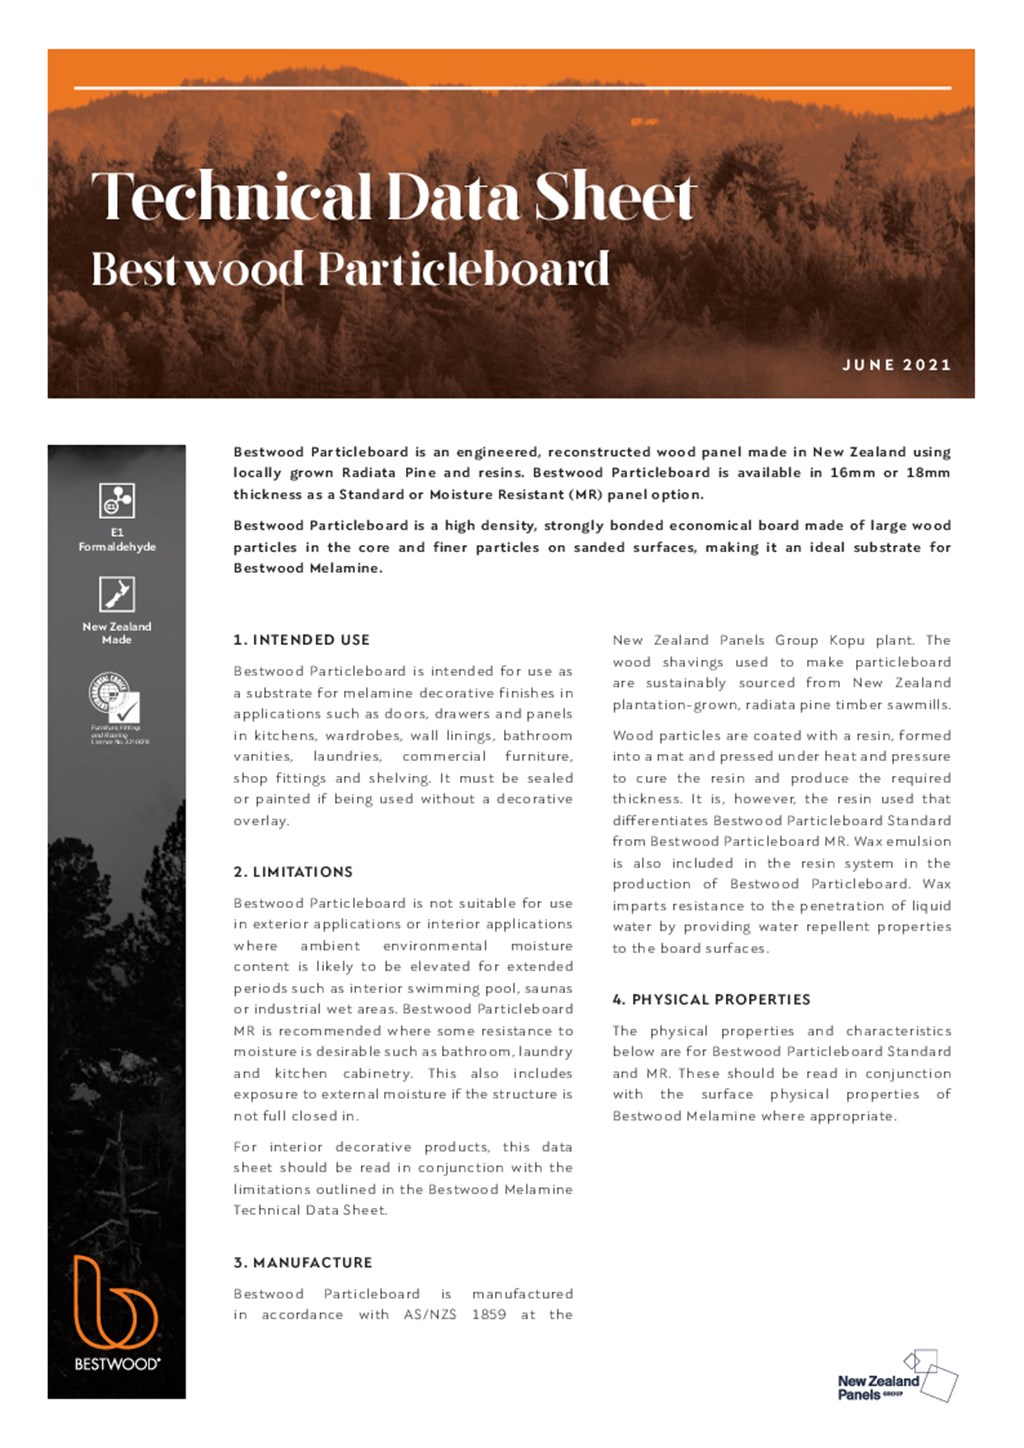 Bestwood Particleboard Technical Data Sheet